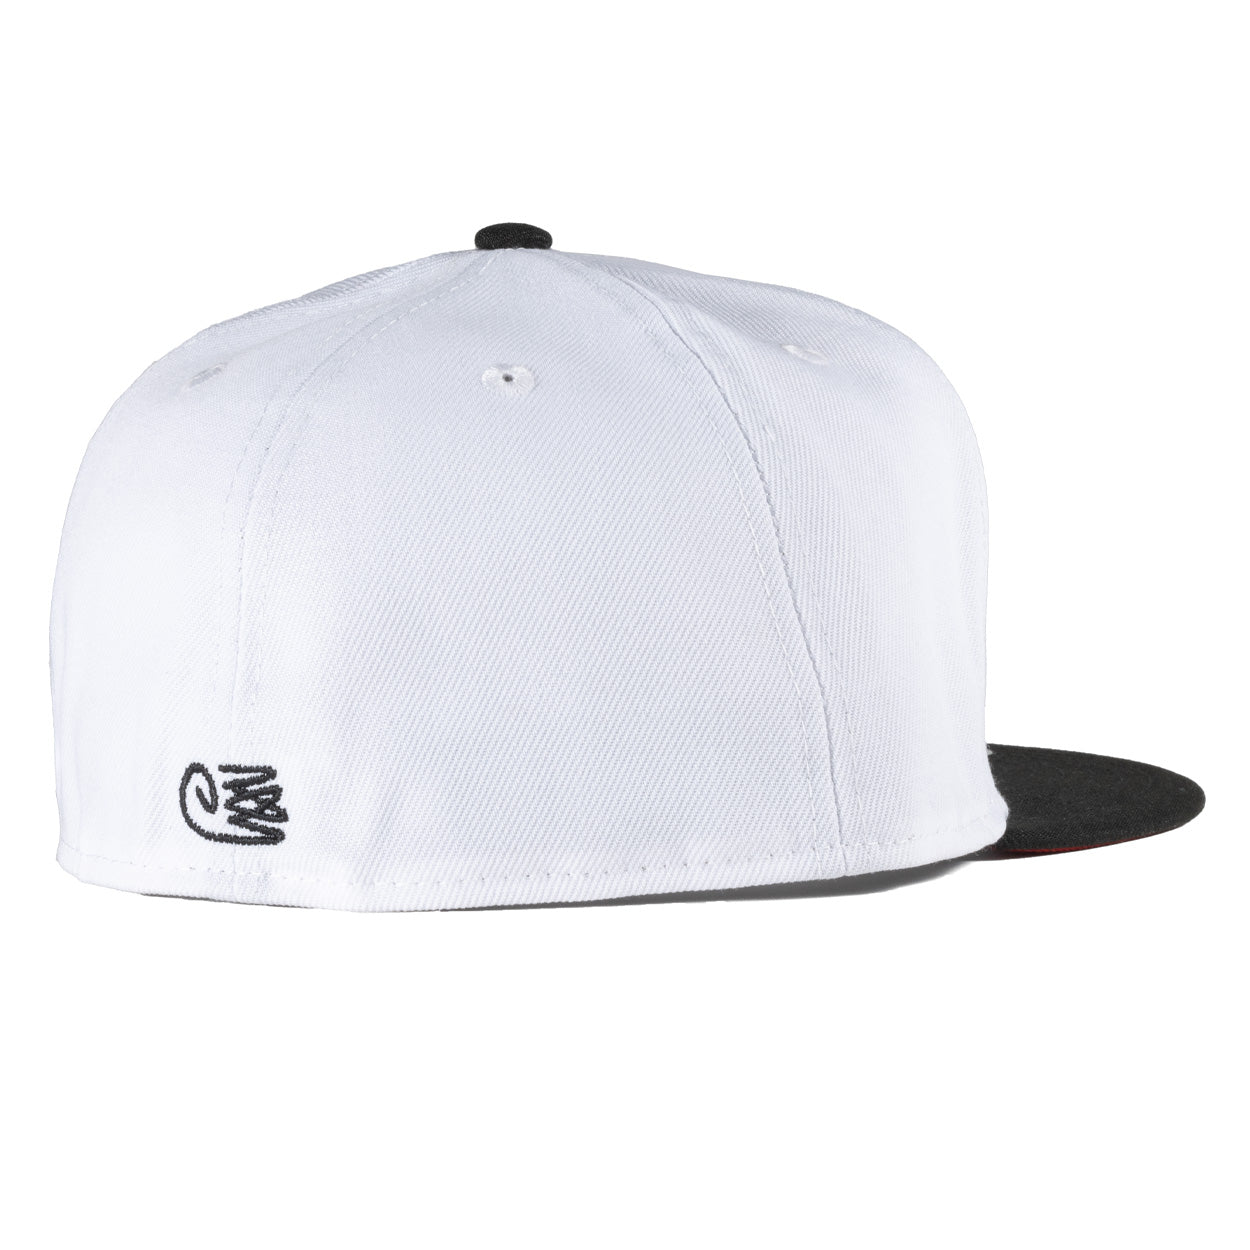 Juicy New Era Fitted